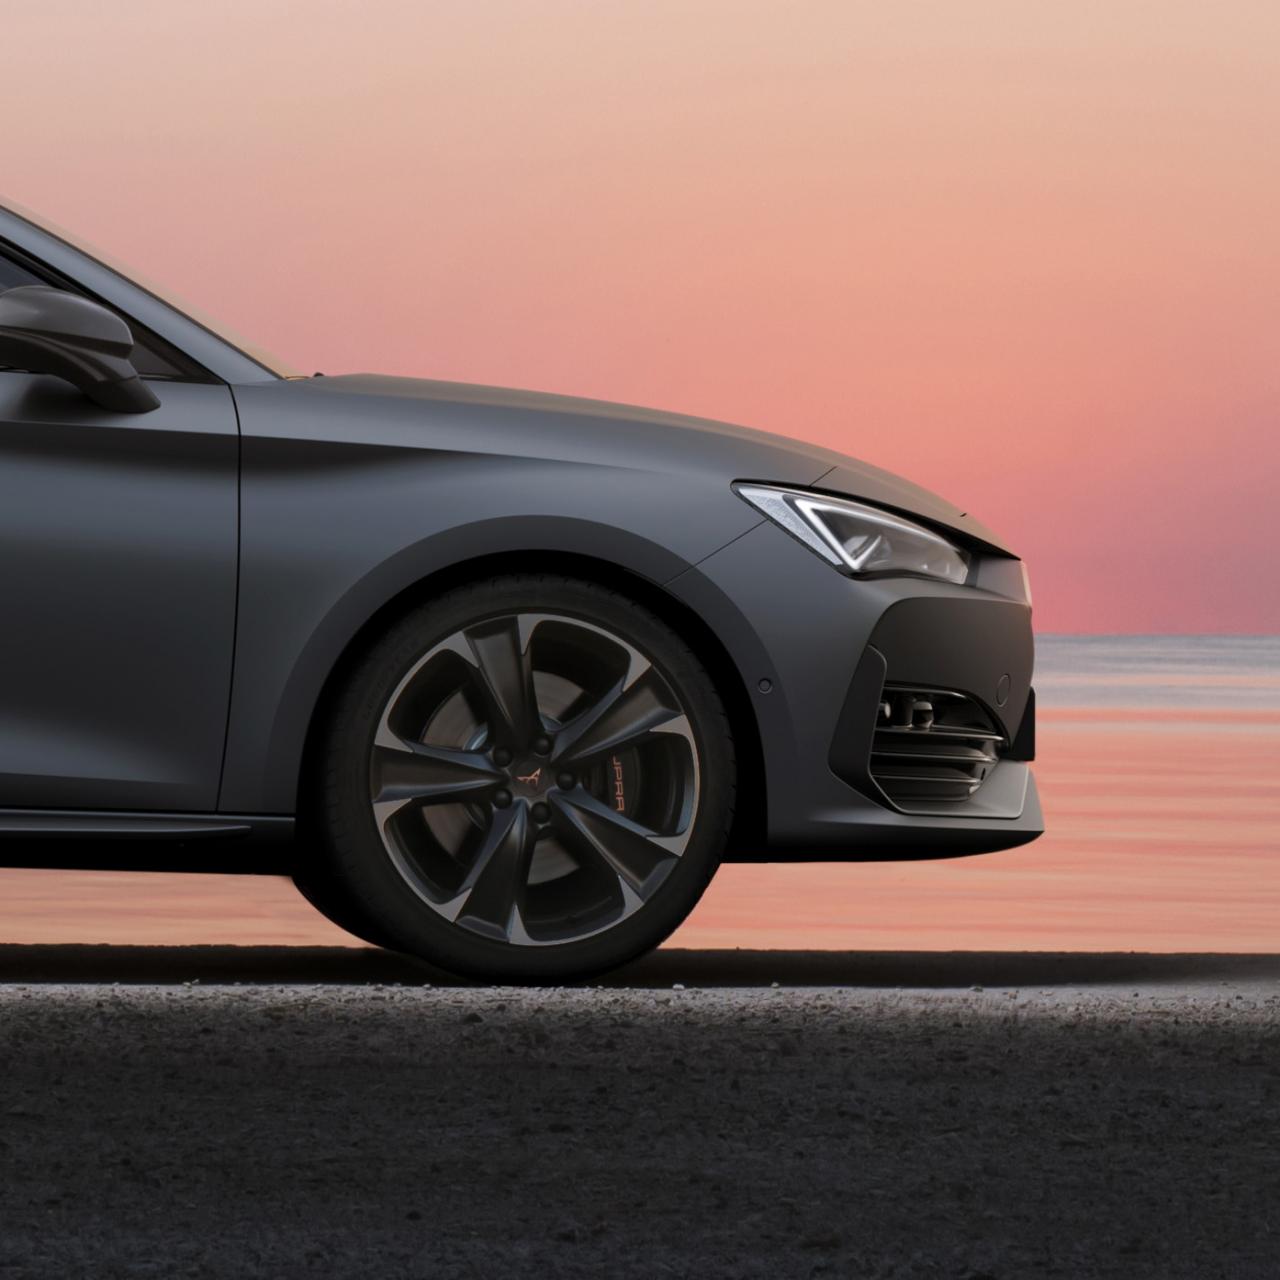 SEAT and CUPRA find a winning formula with the new Leon